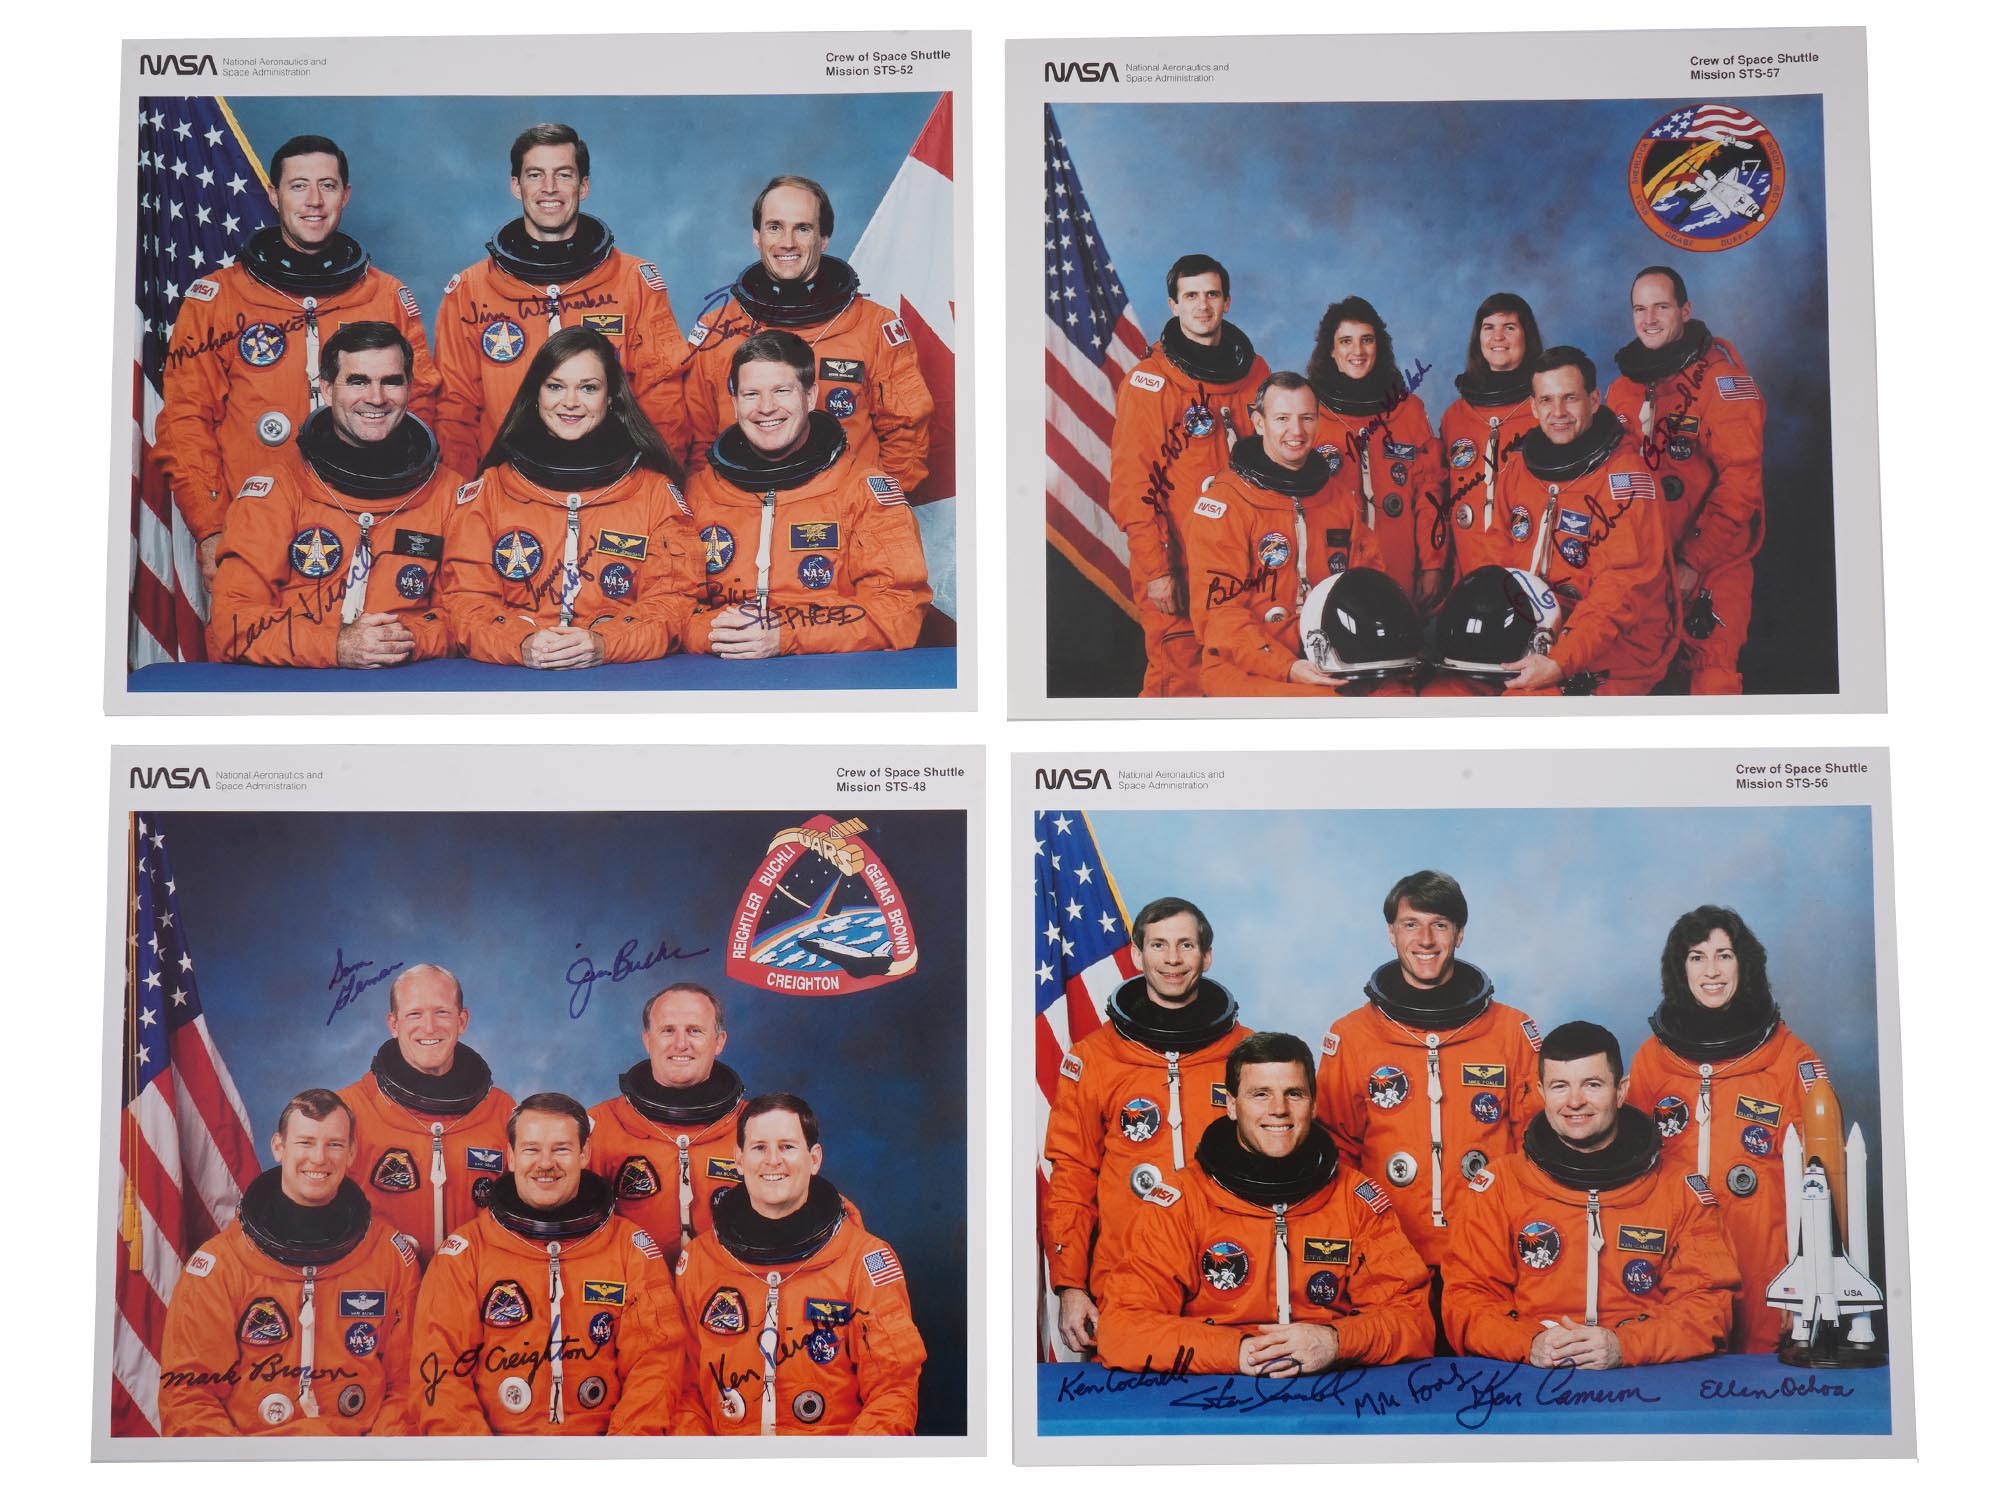 LOT 15 NASA PHOTOS AUTOGRAPHED BY SHUTTLES CREWS PIC-2